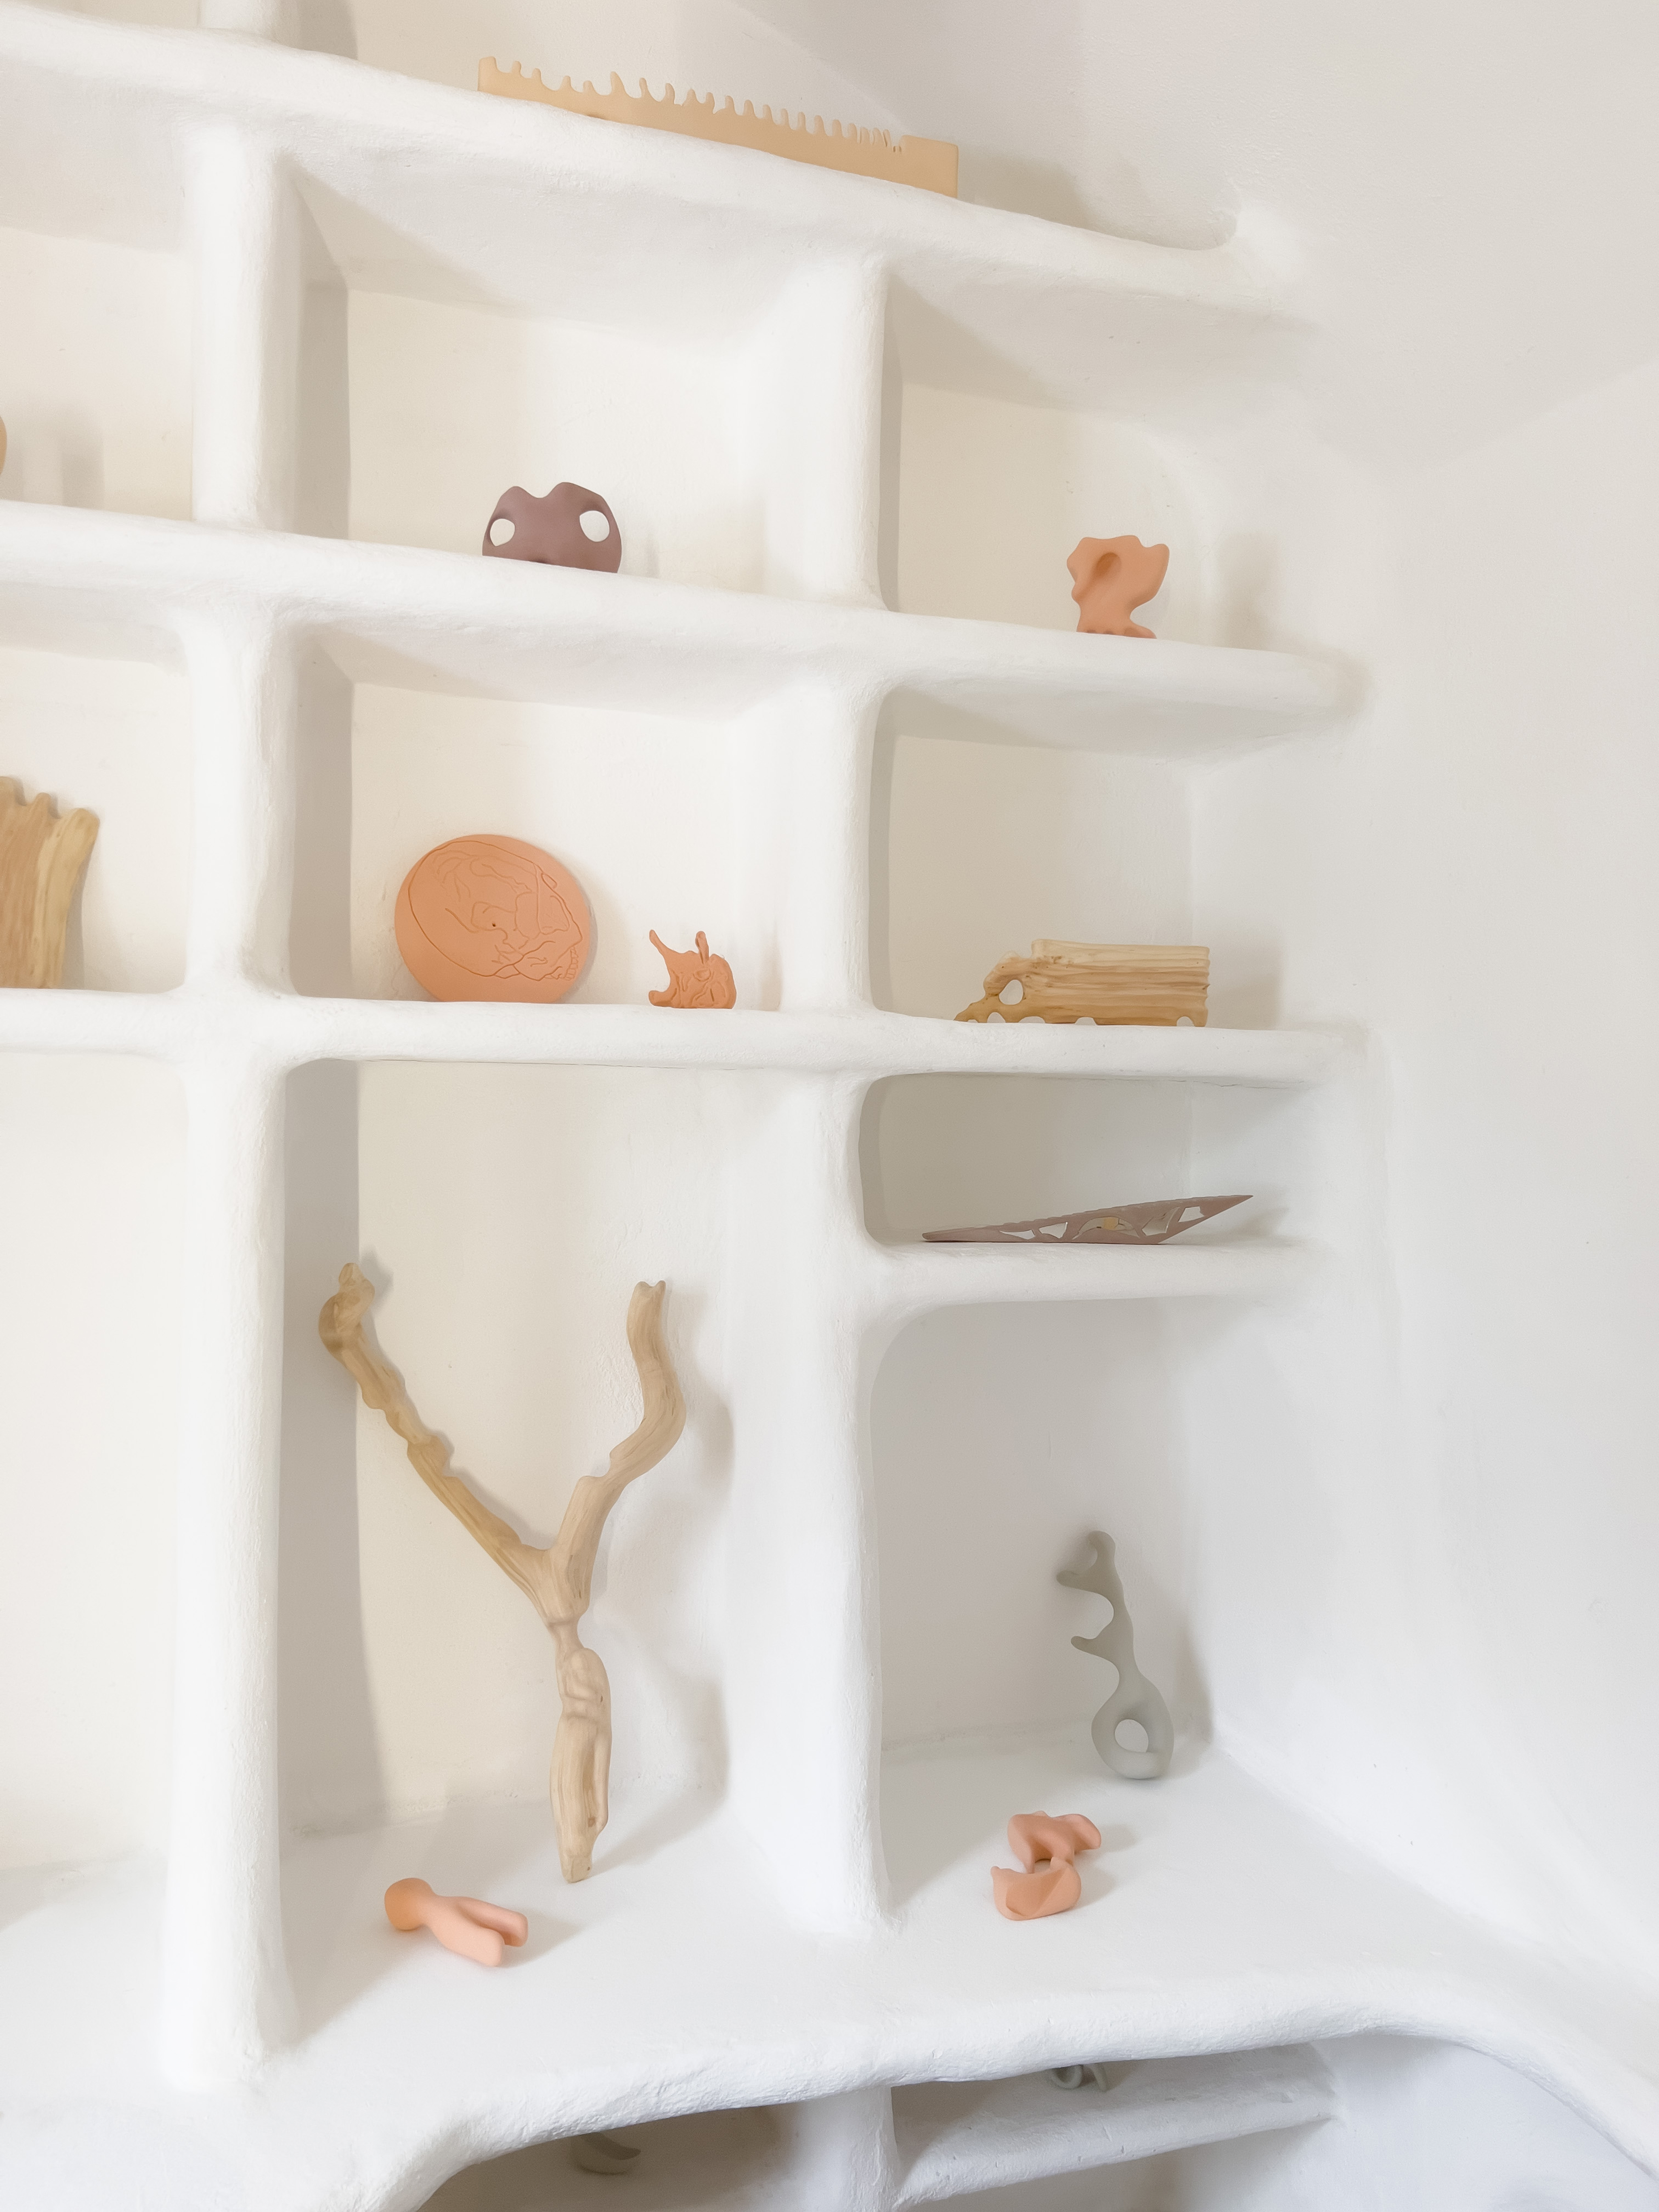 Photo of an art installation called Hands (and Other Products of Labor) 2.0 by Klára Čermáková (Common Space, Altes Spital, Viechtach, Germany) [Detail]. A detailed look at the art objects in the back of the space/shelves.